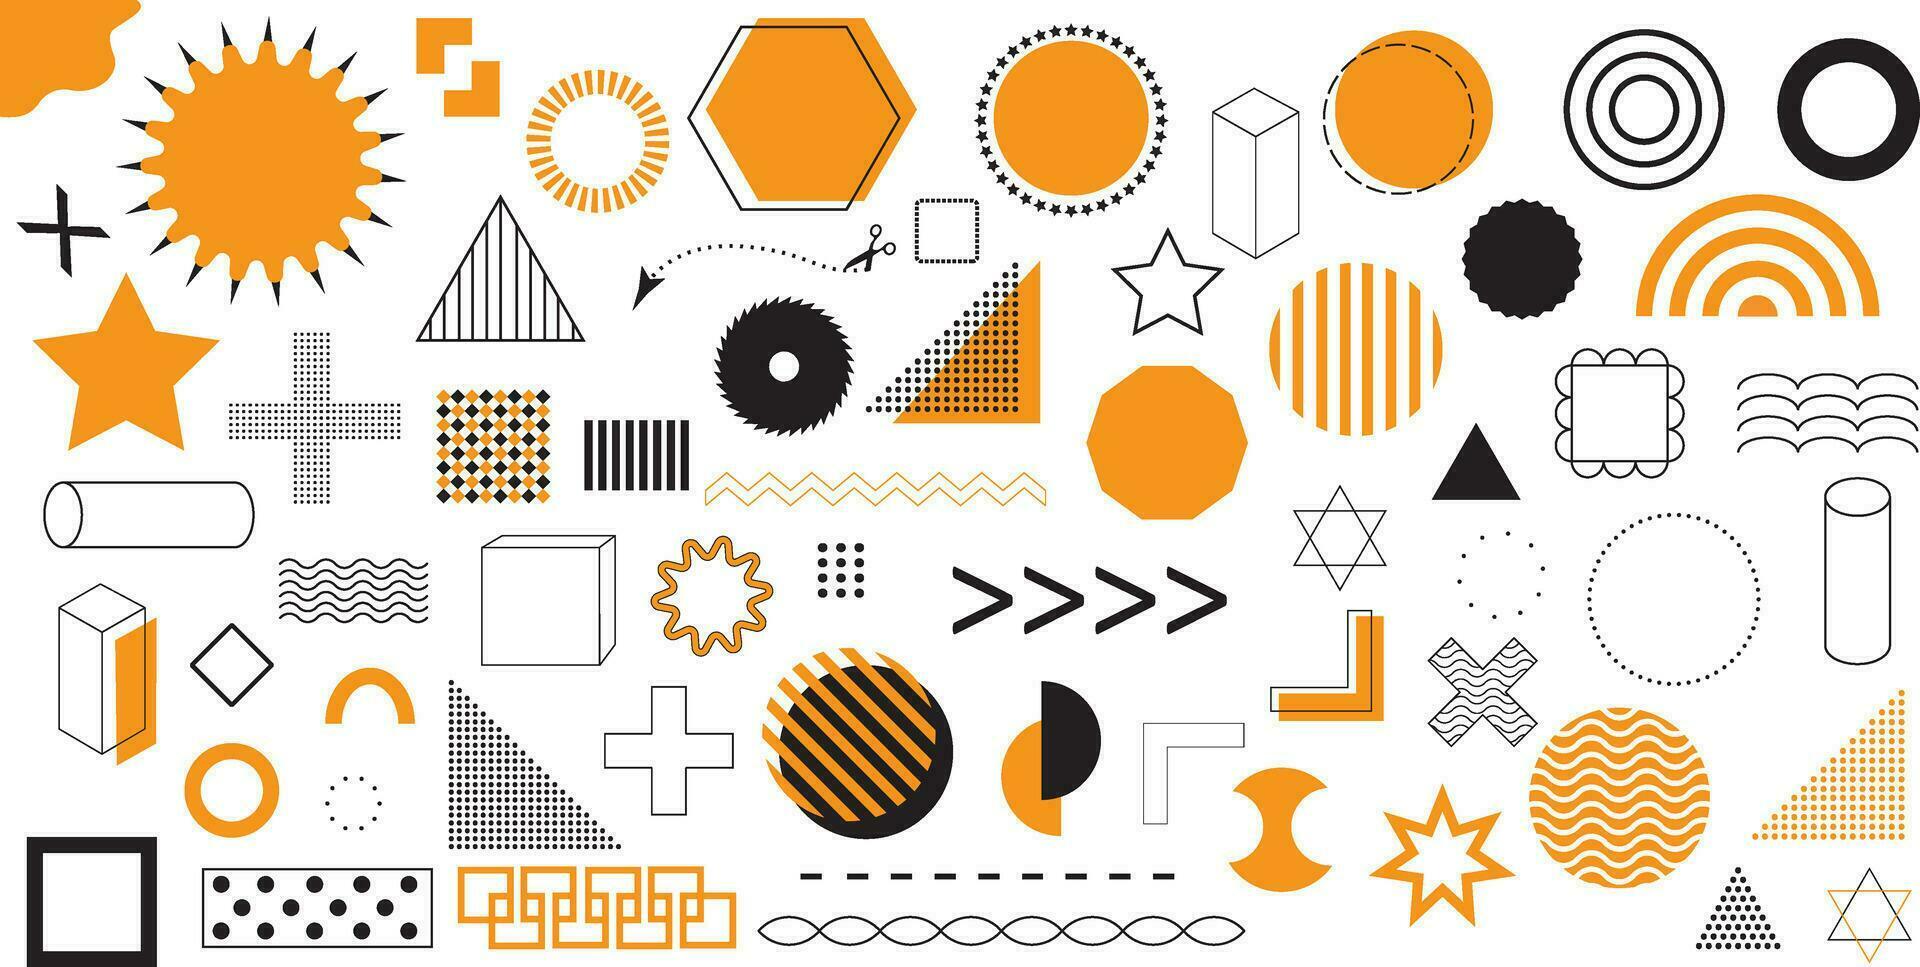 Geometric shapes bundle. Memphis graphics style icons for creating posts, lefleats, banners, social media posts. Modern minimalist shapes. vector